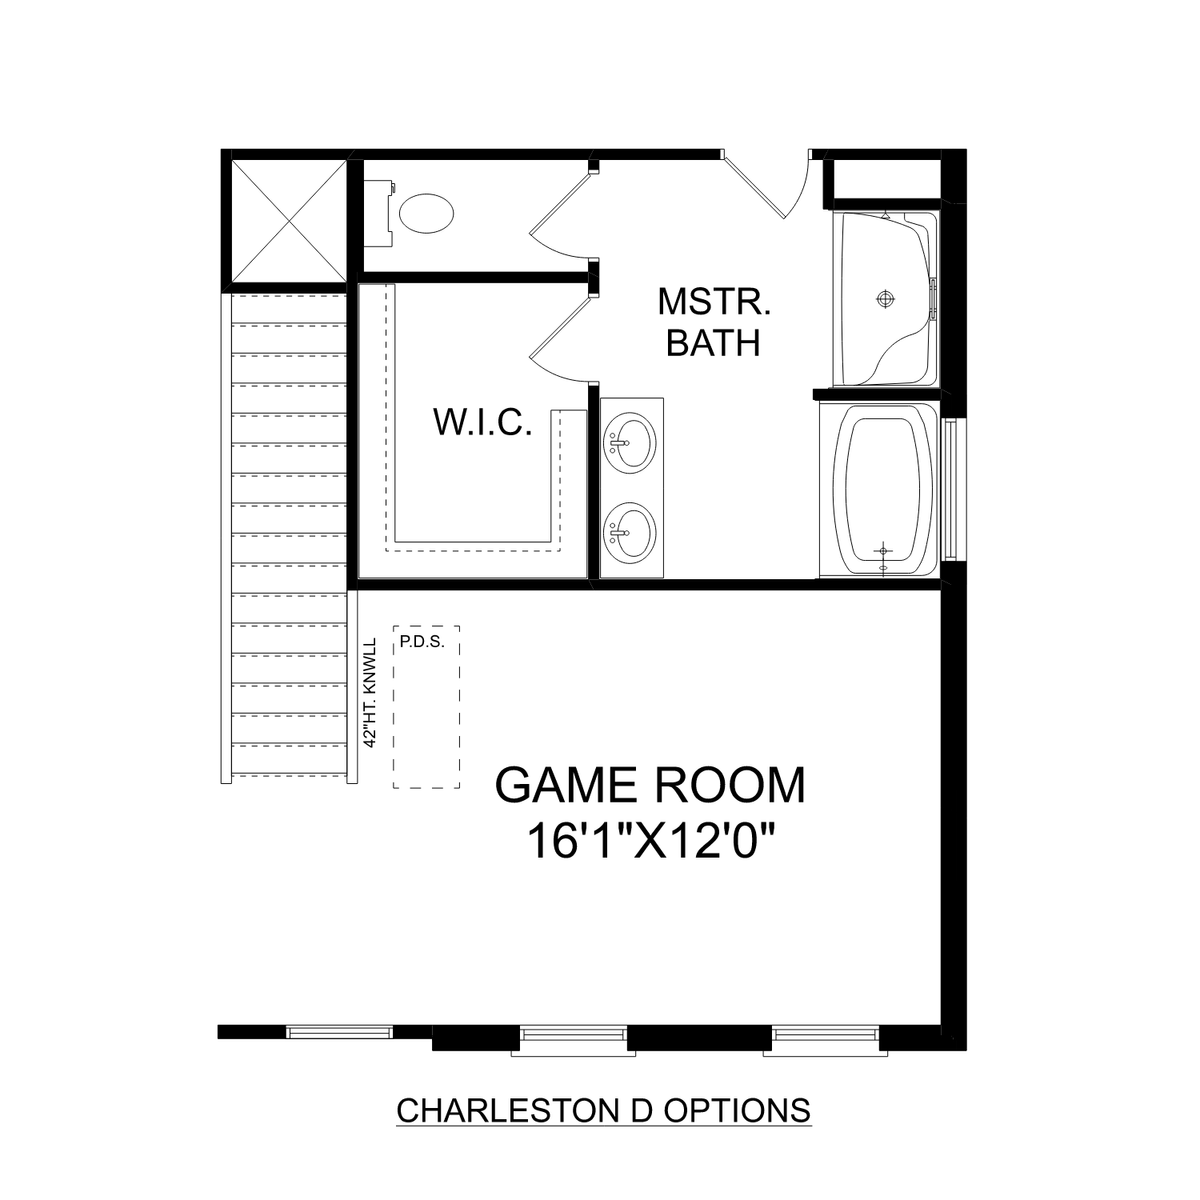 3 - The Charleston D buildable floor plan layout in Davidson Homes' Flint Meadows community.